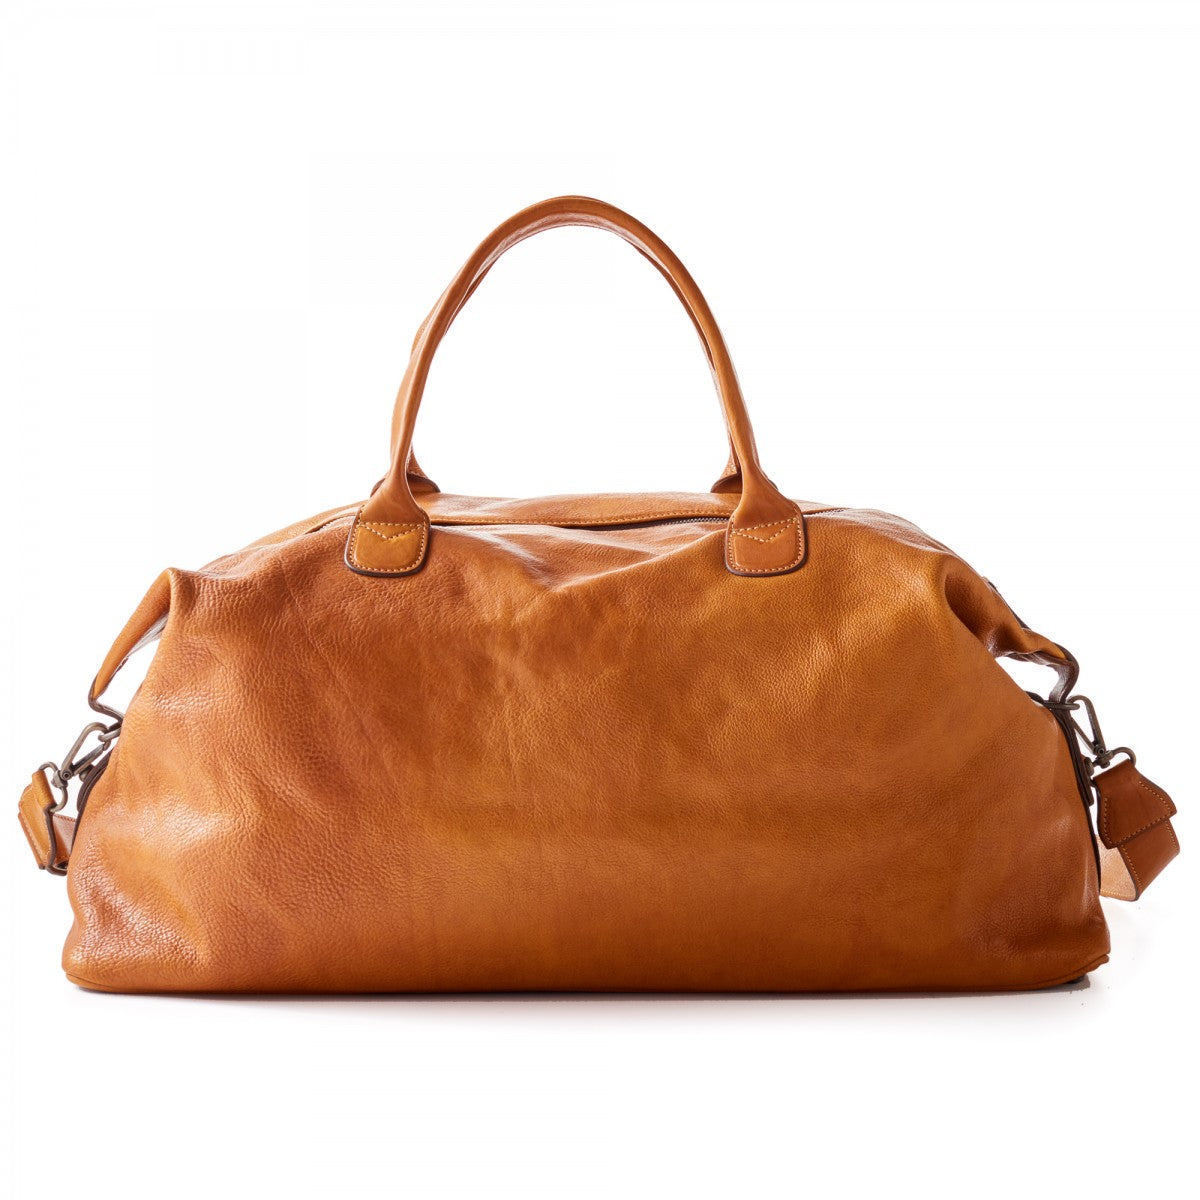 Moore and Giles Benedict Weekend Bag in Modern Saddle